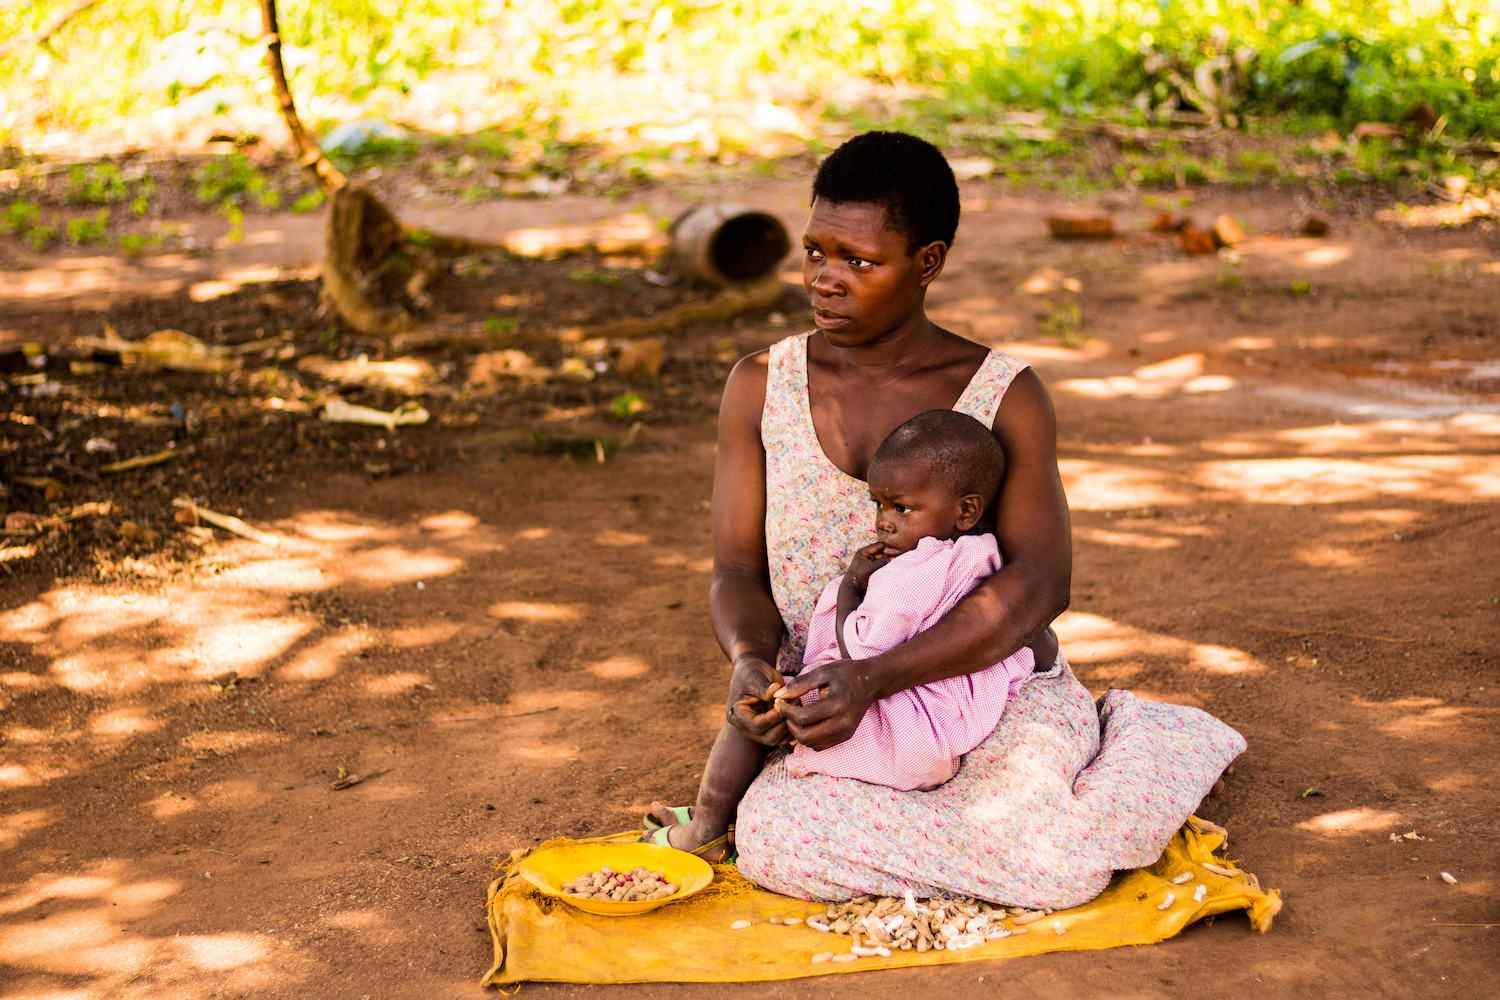  Women in the villages of Busoga often must supervise their babies and toddlers as they perform the domestic duties for which they are responsible. 